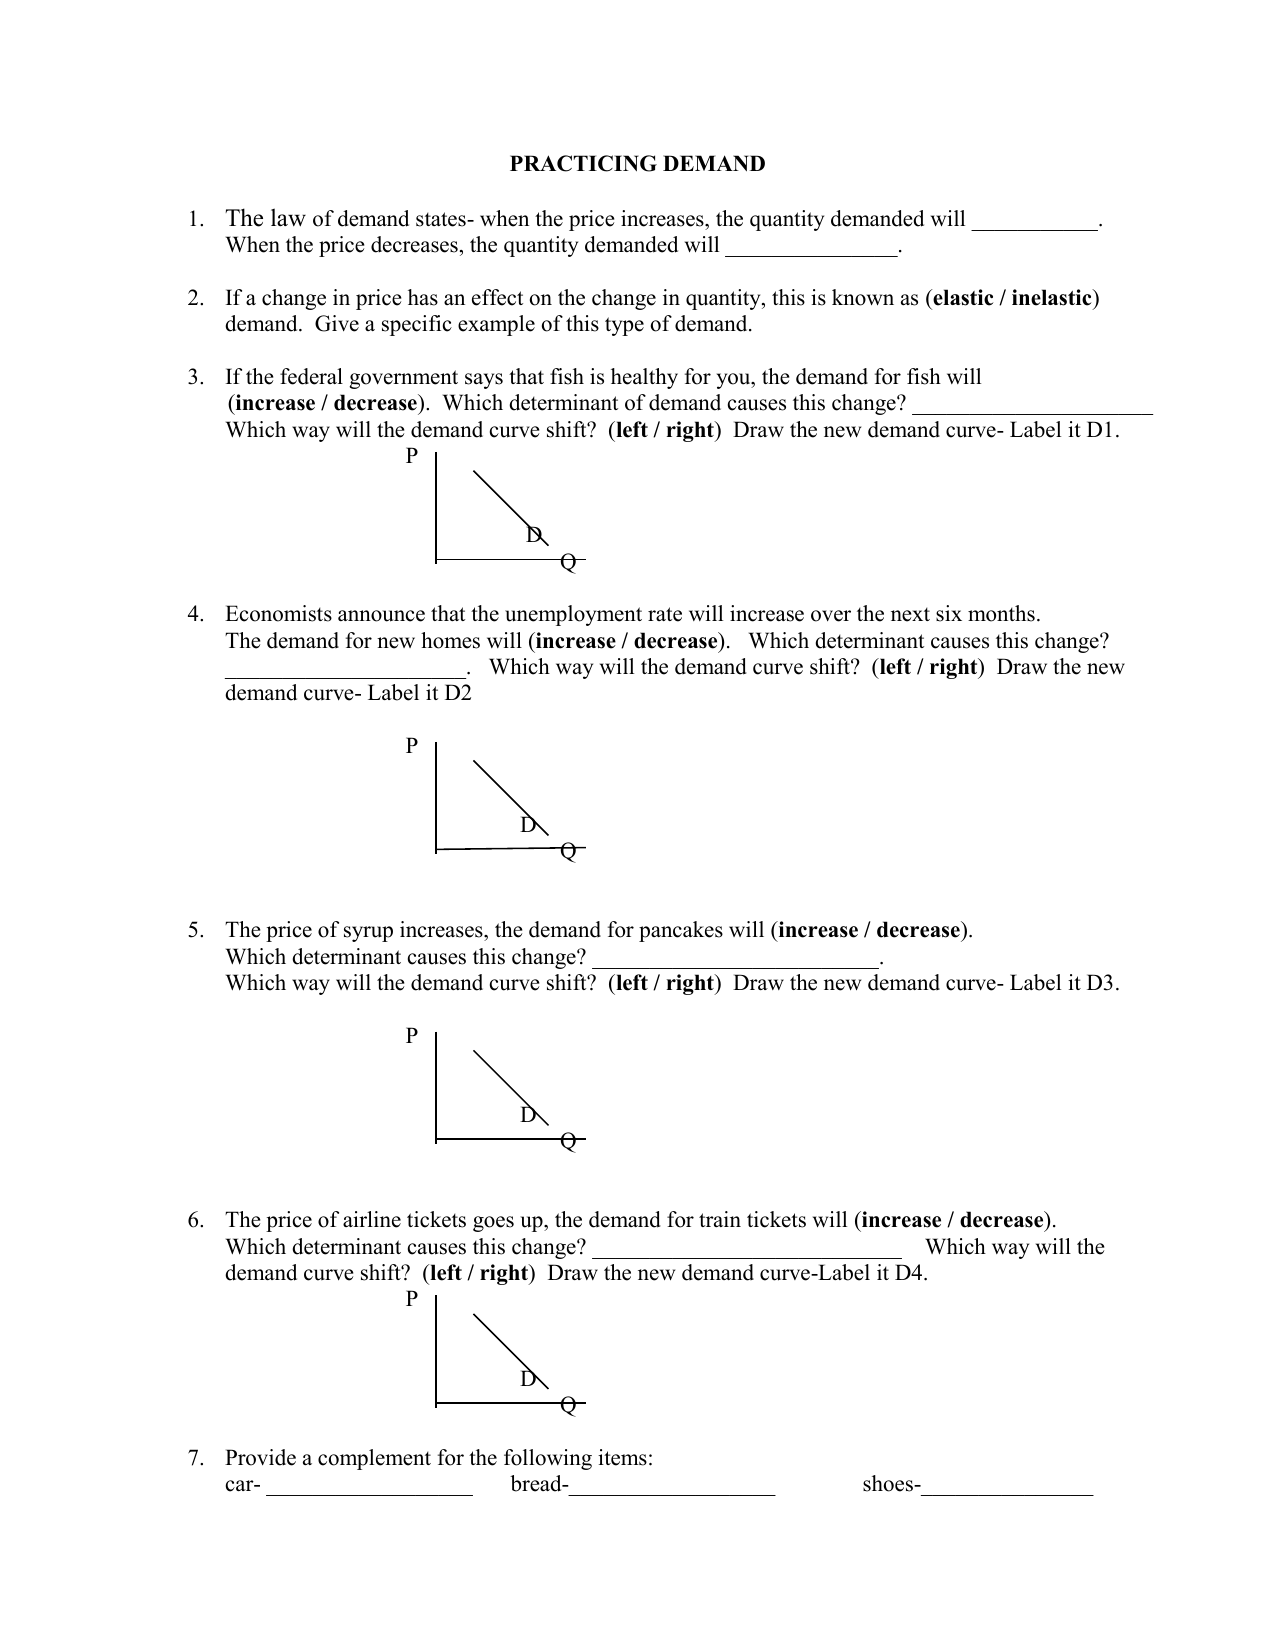 Supply And Demand Worksheet